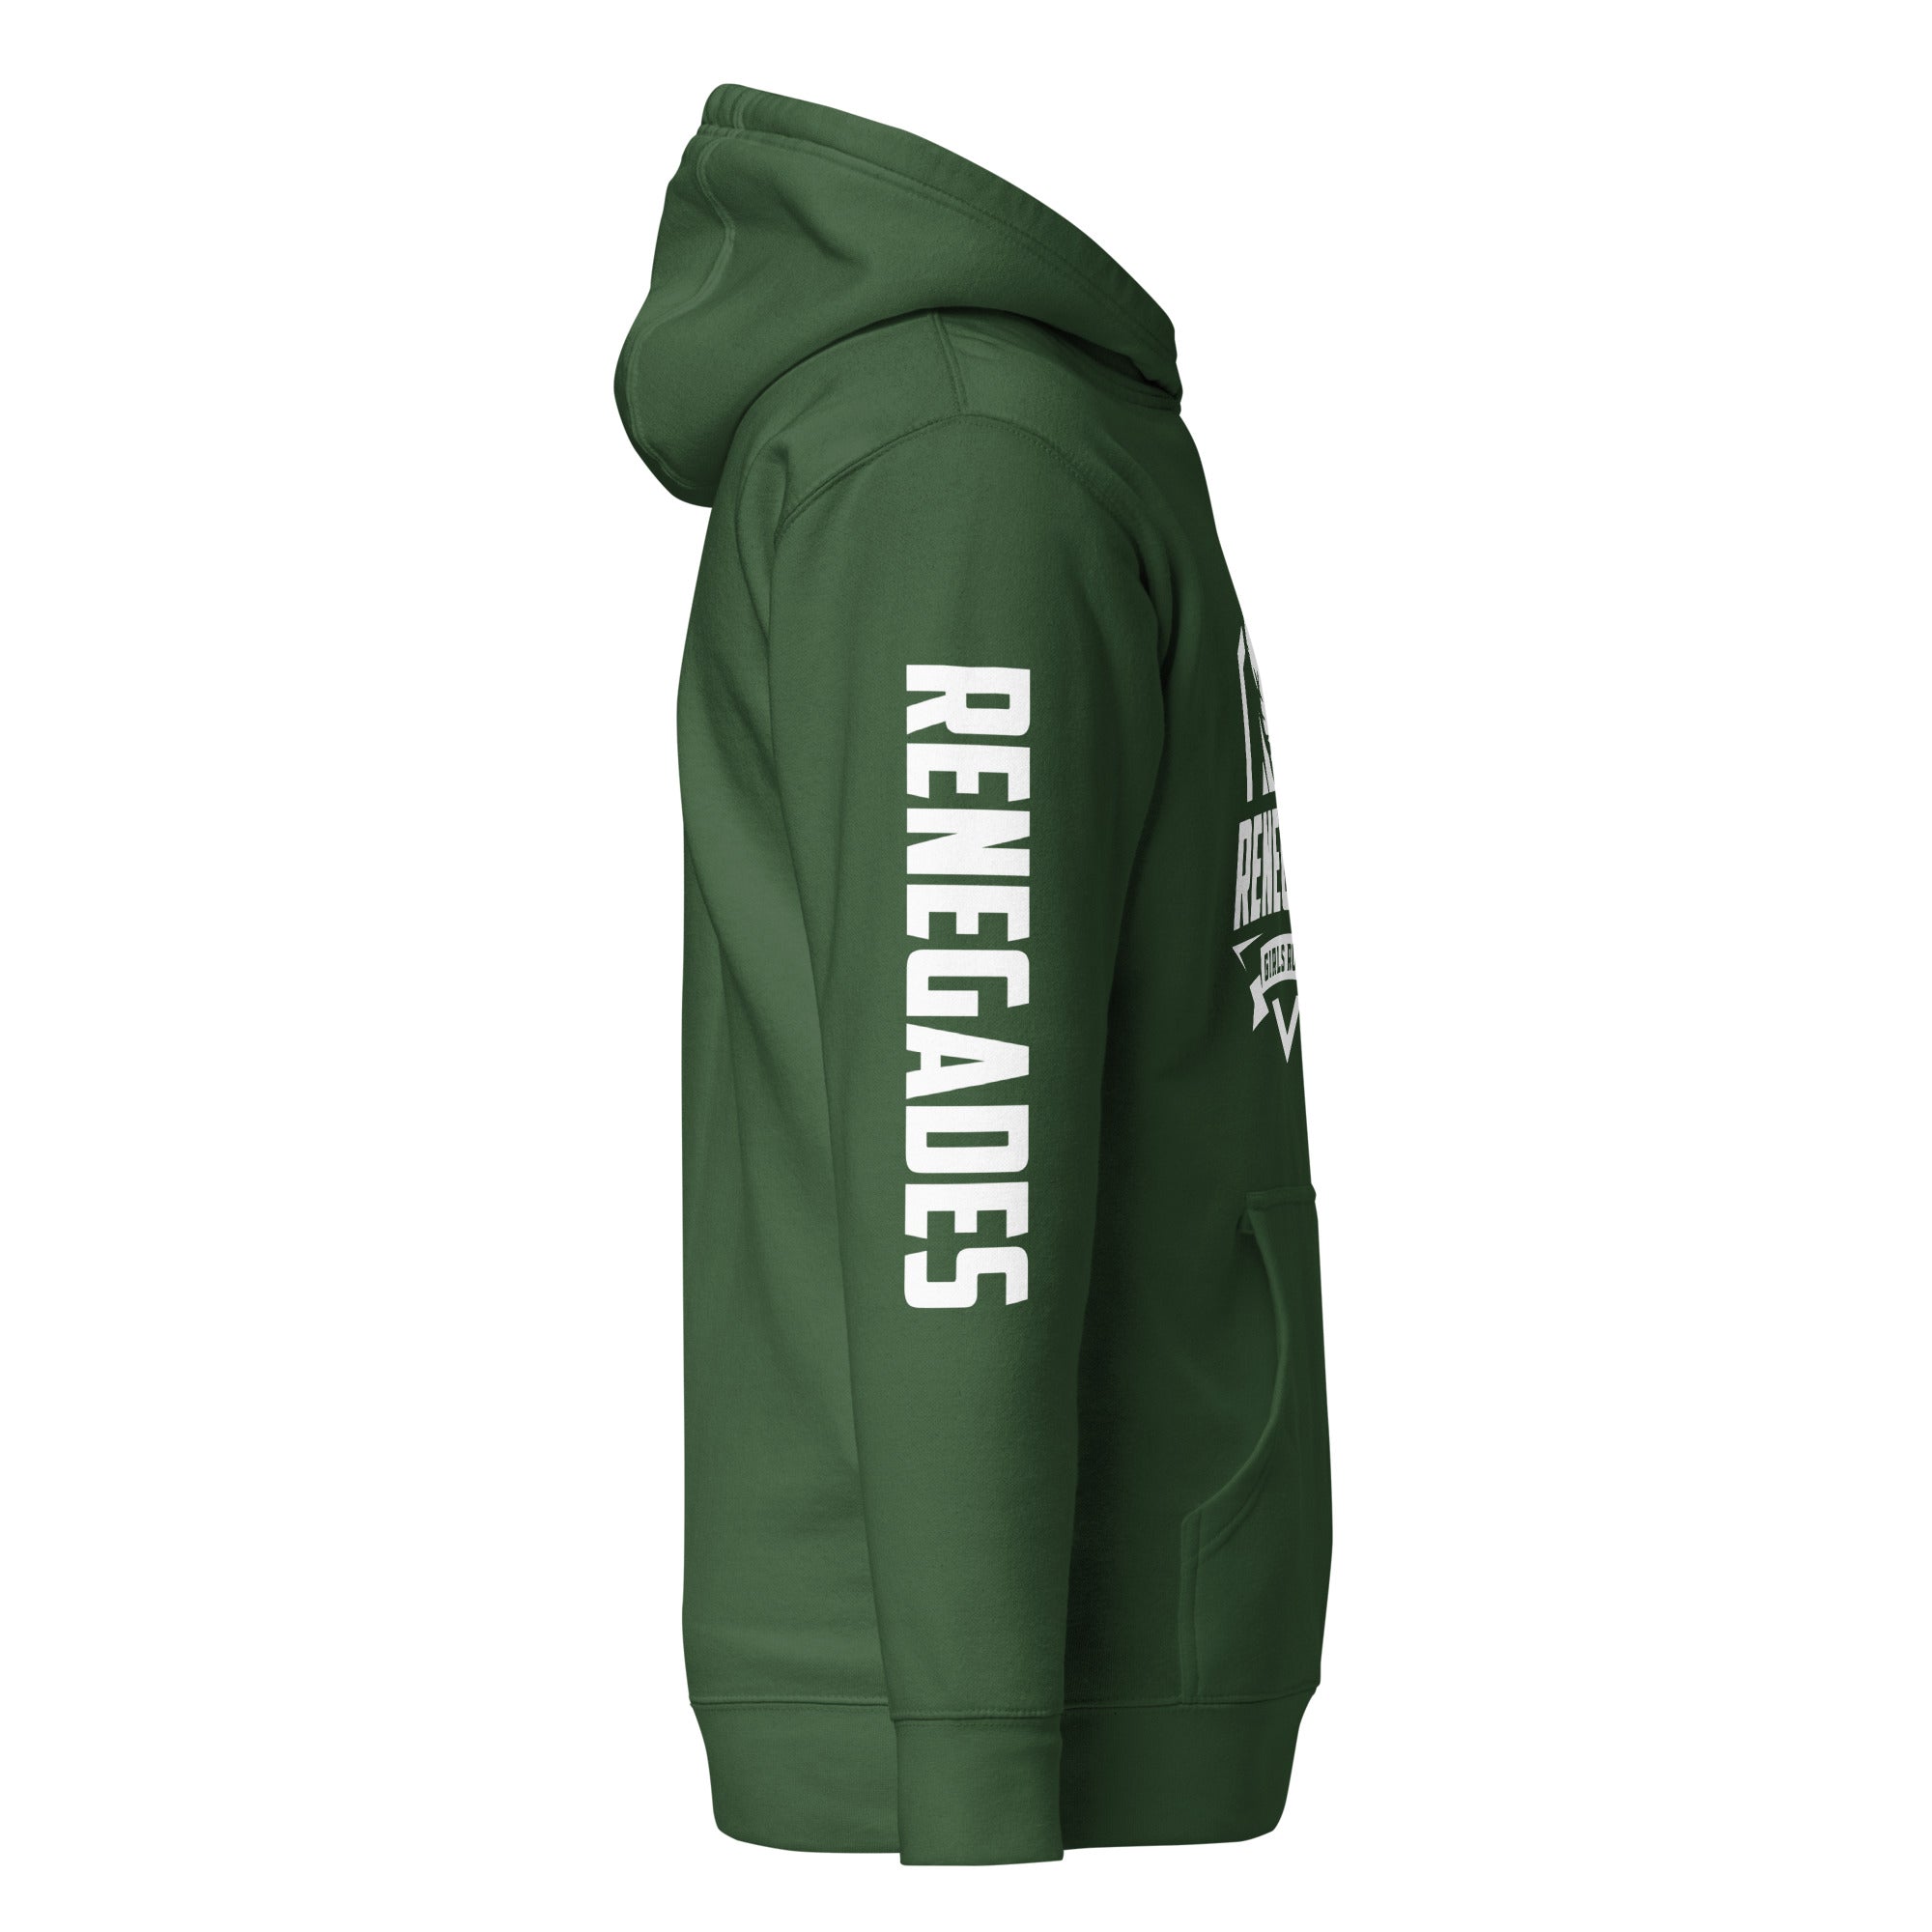 Rugby Imports Renegades Retro Hoodie